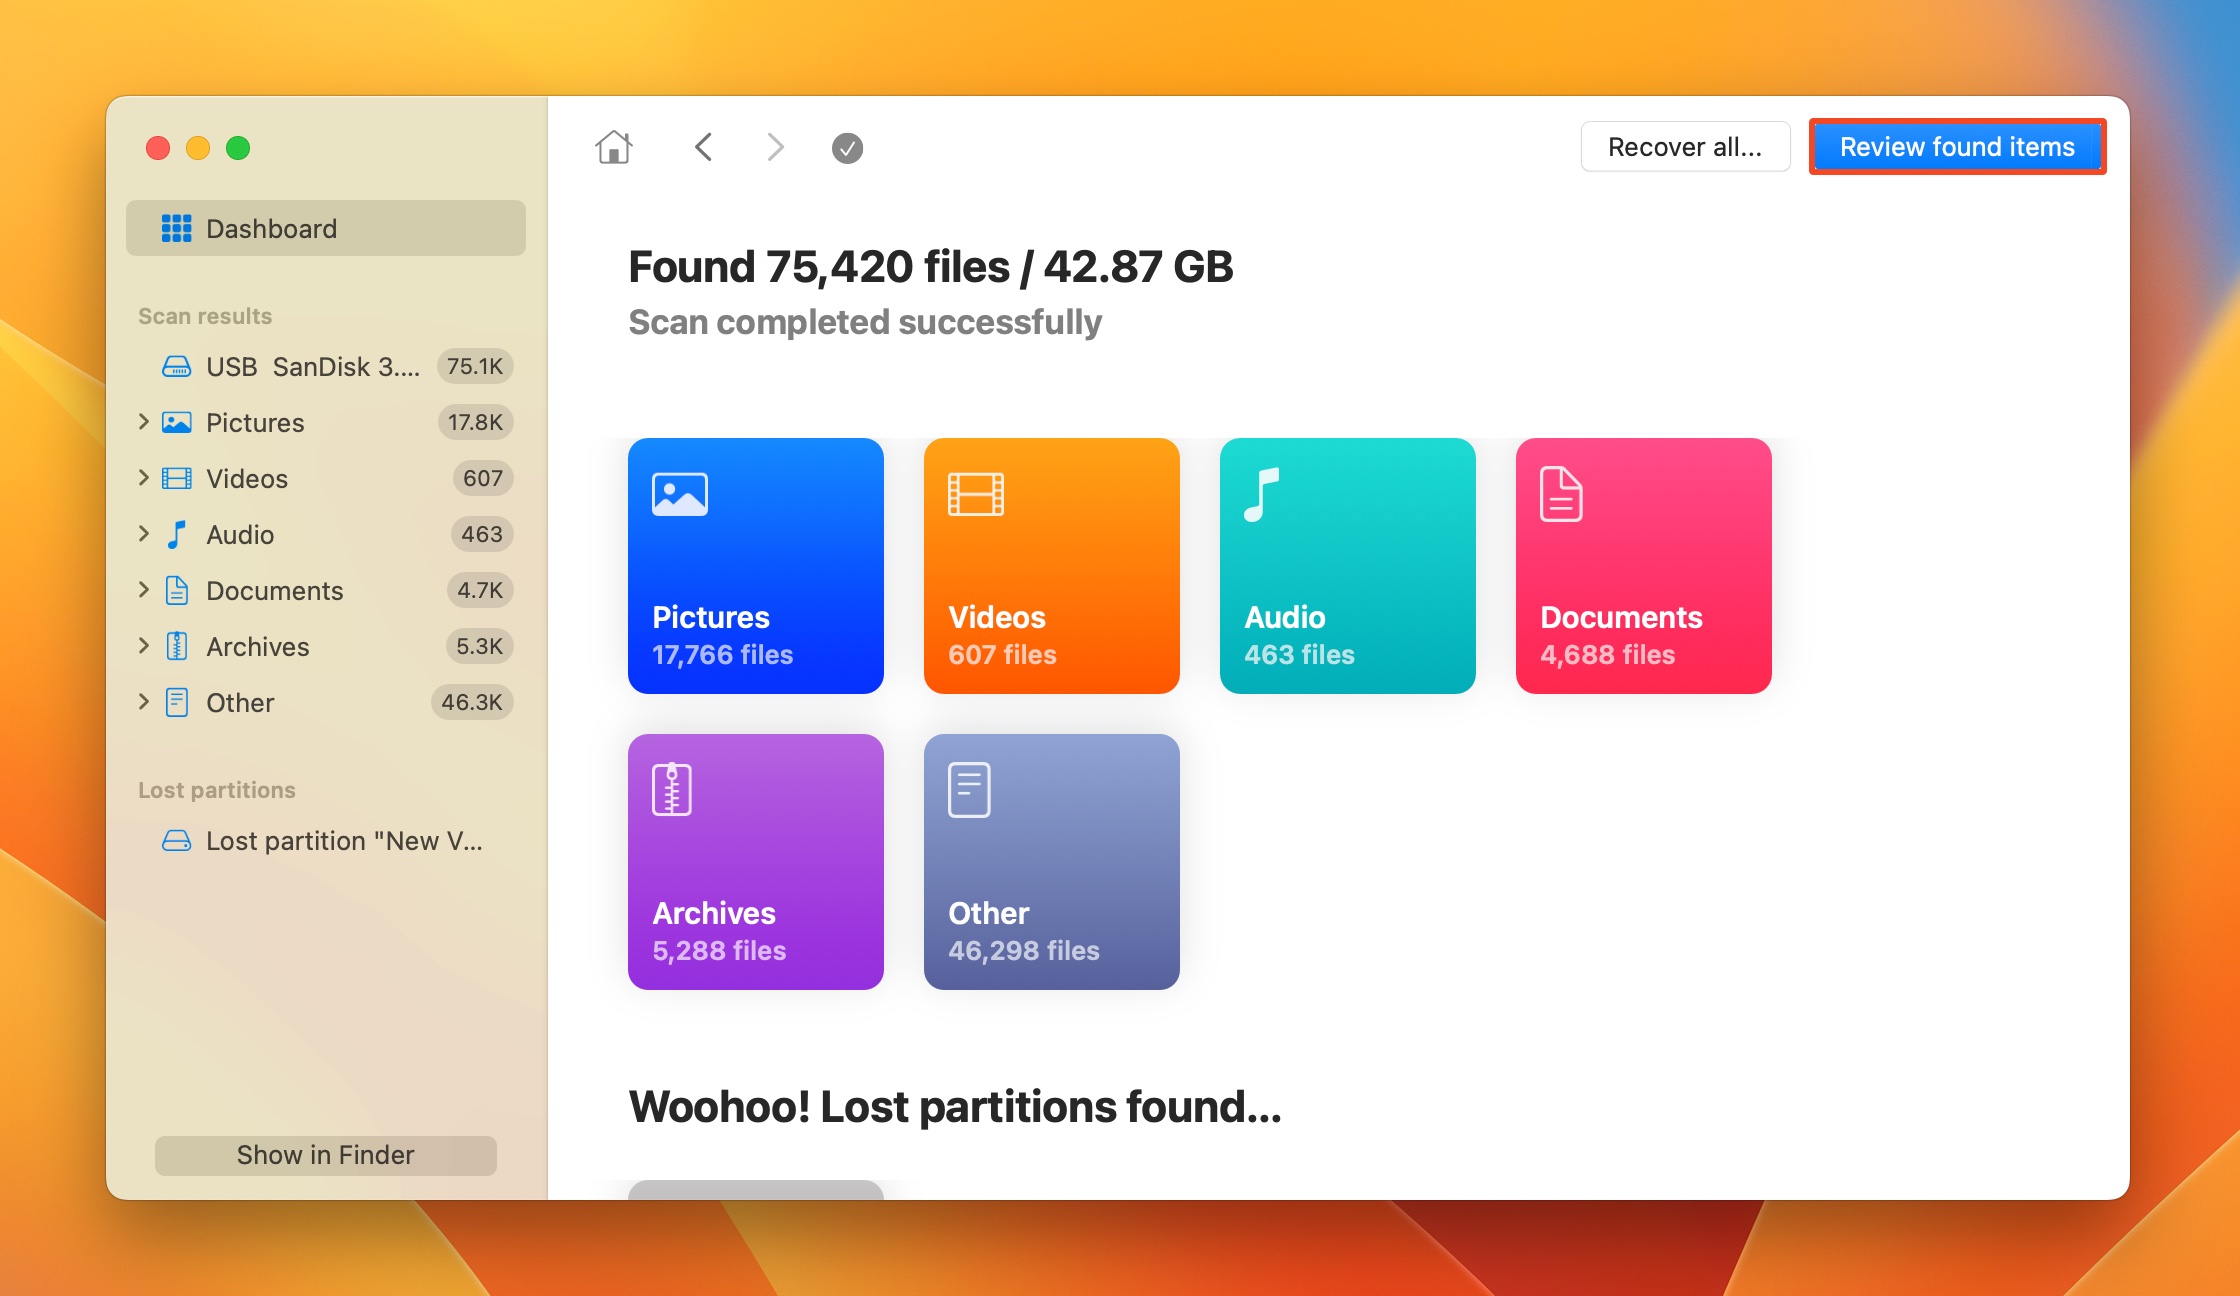 Review found items screen in macOS.